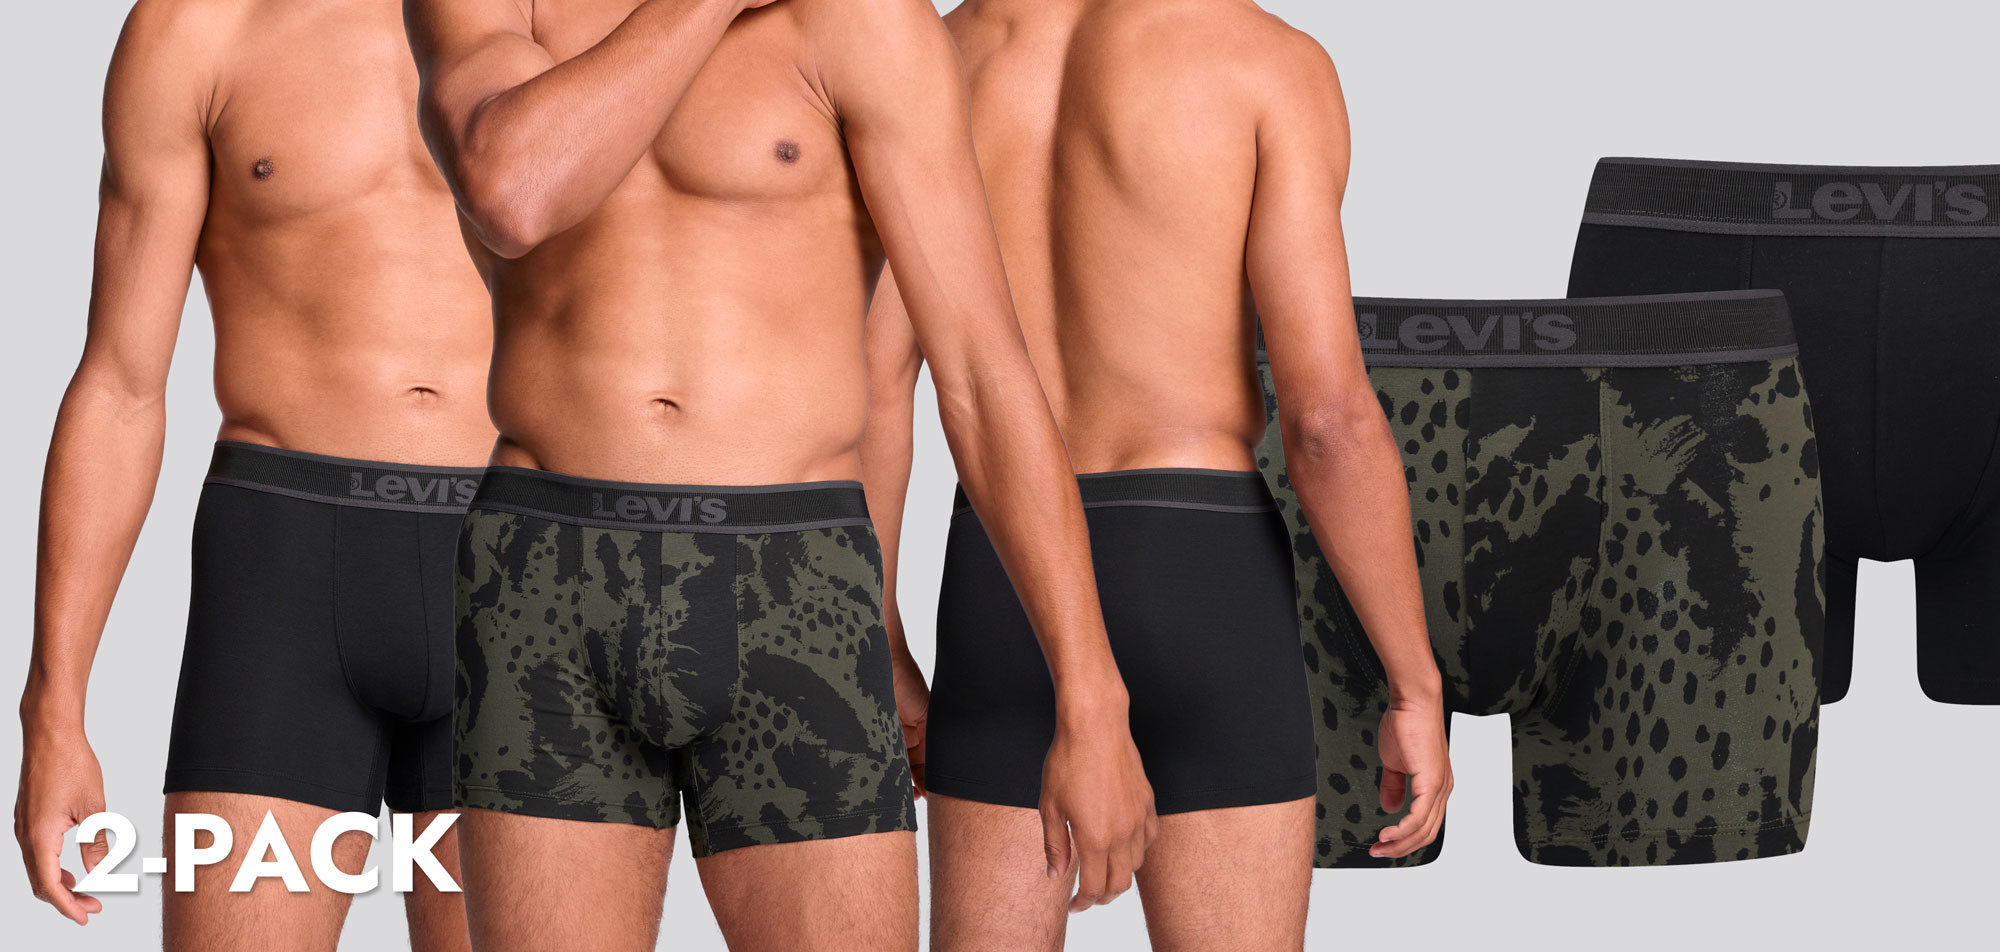 Levi_s Boxer Brief 2-Pack 904 Animal Camo, color Nee